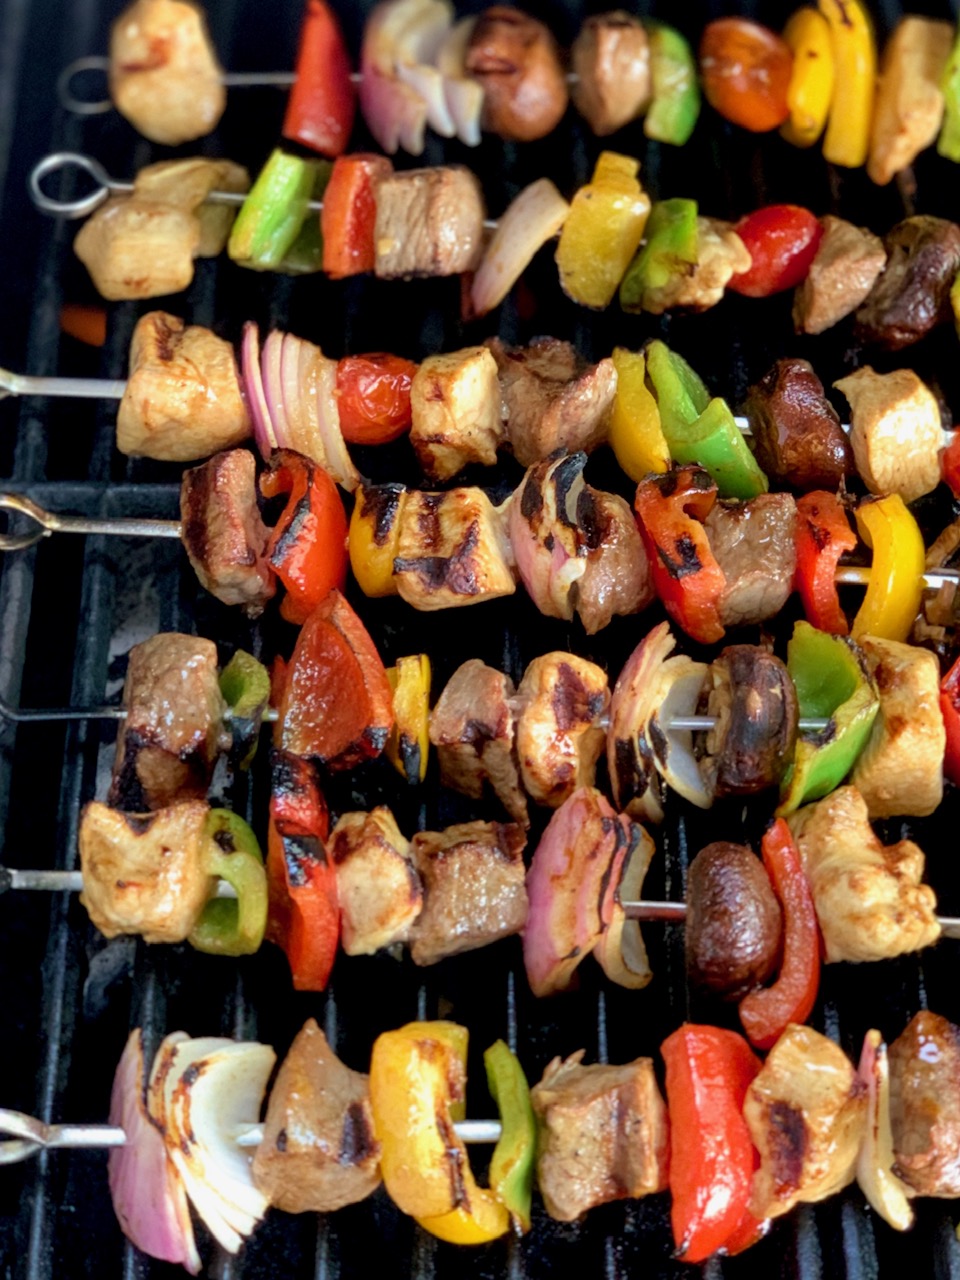 Grilled Shish Kabobs - Eating Gluten and Dairy Free